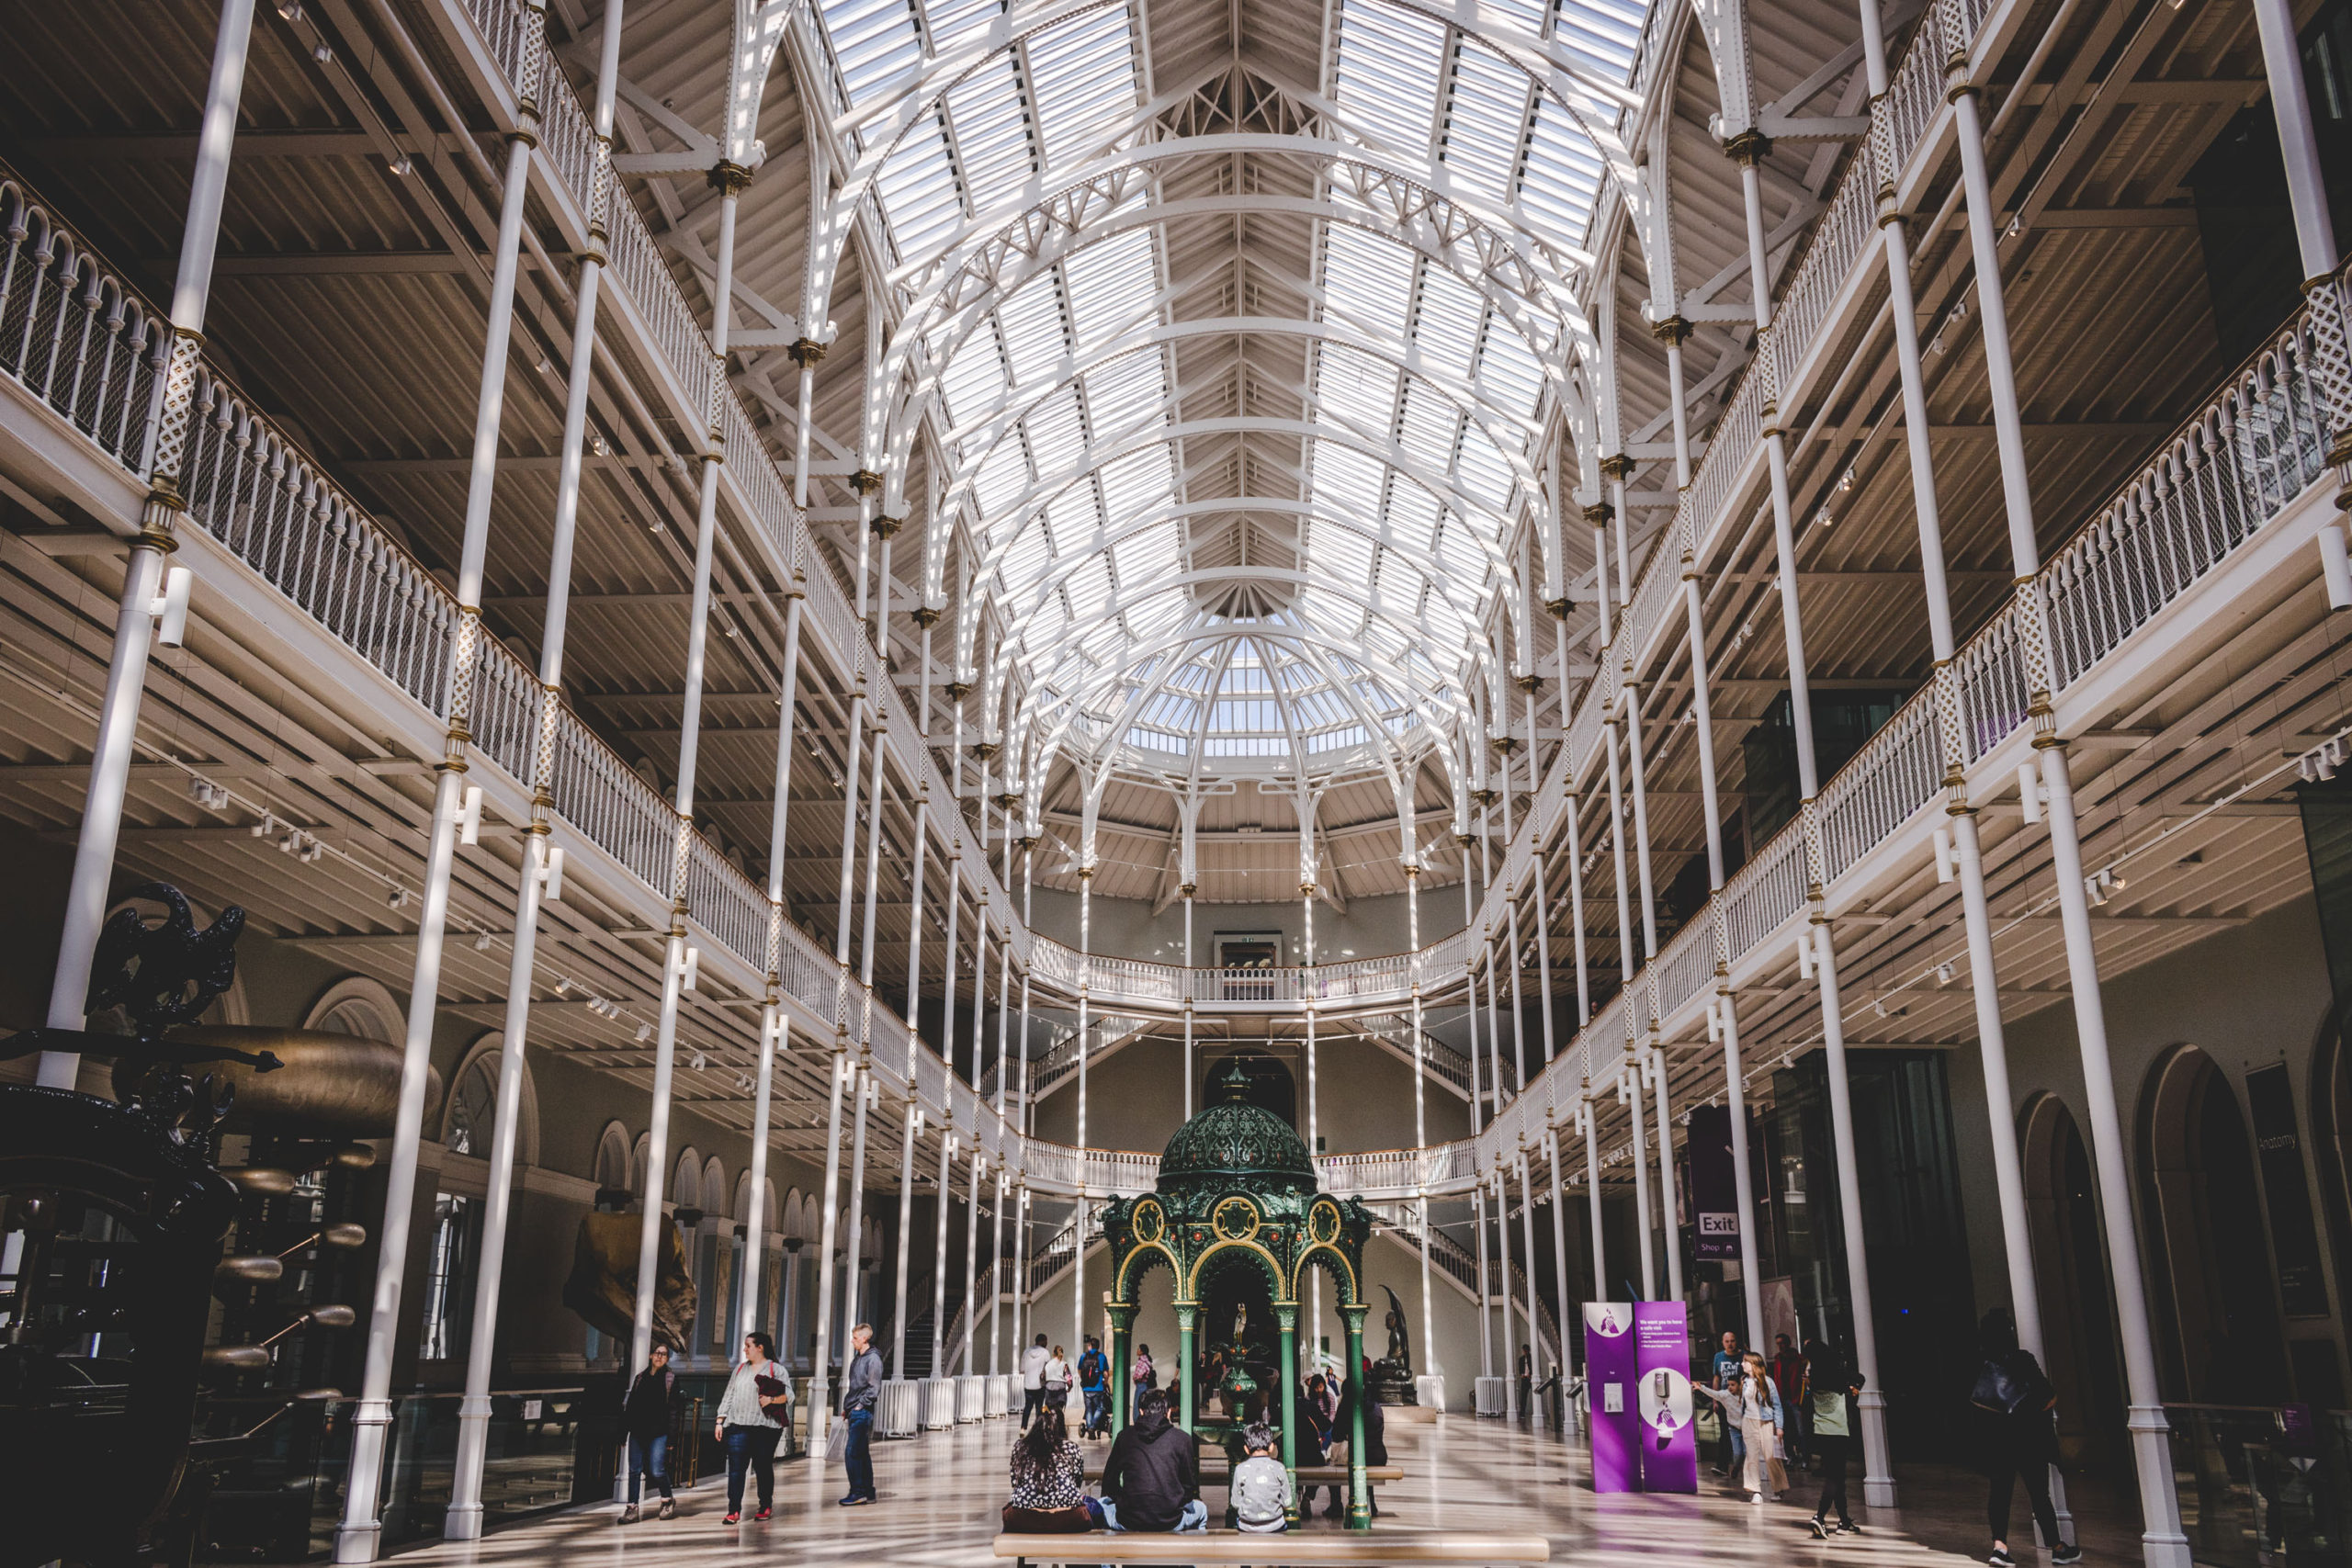 20+ Free Things to Do in Edinburgh: Ultimate Guide by a Local